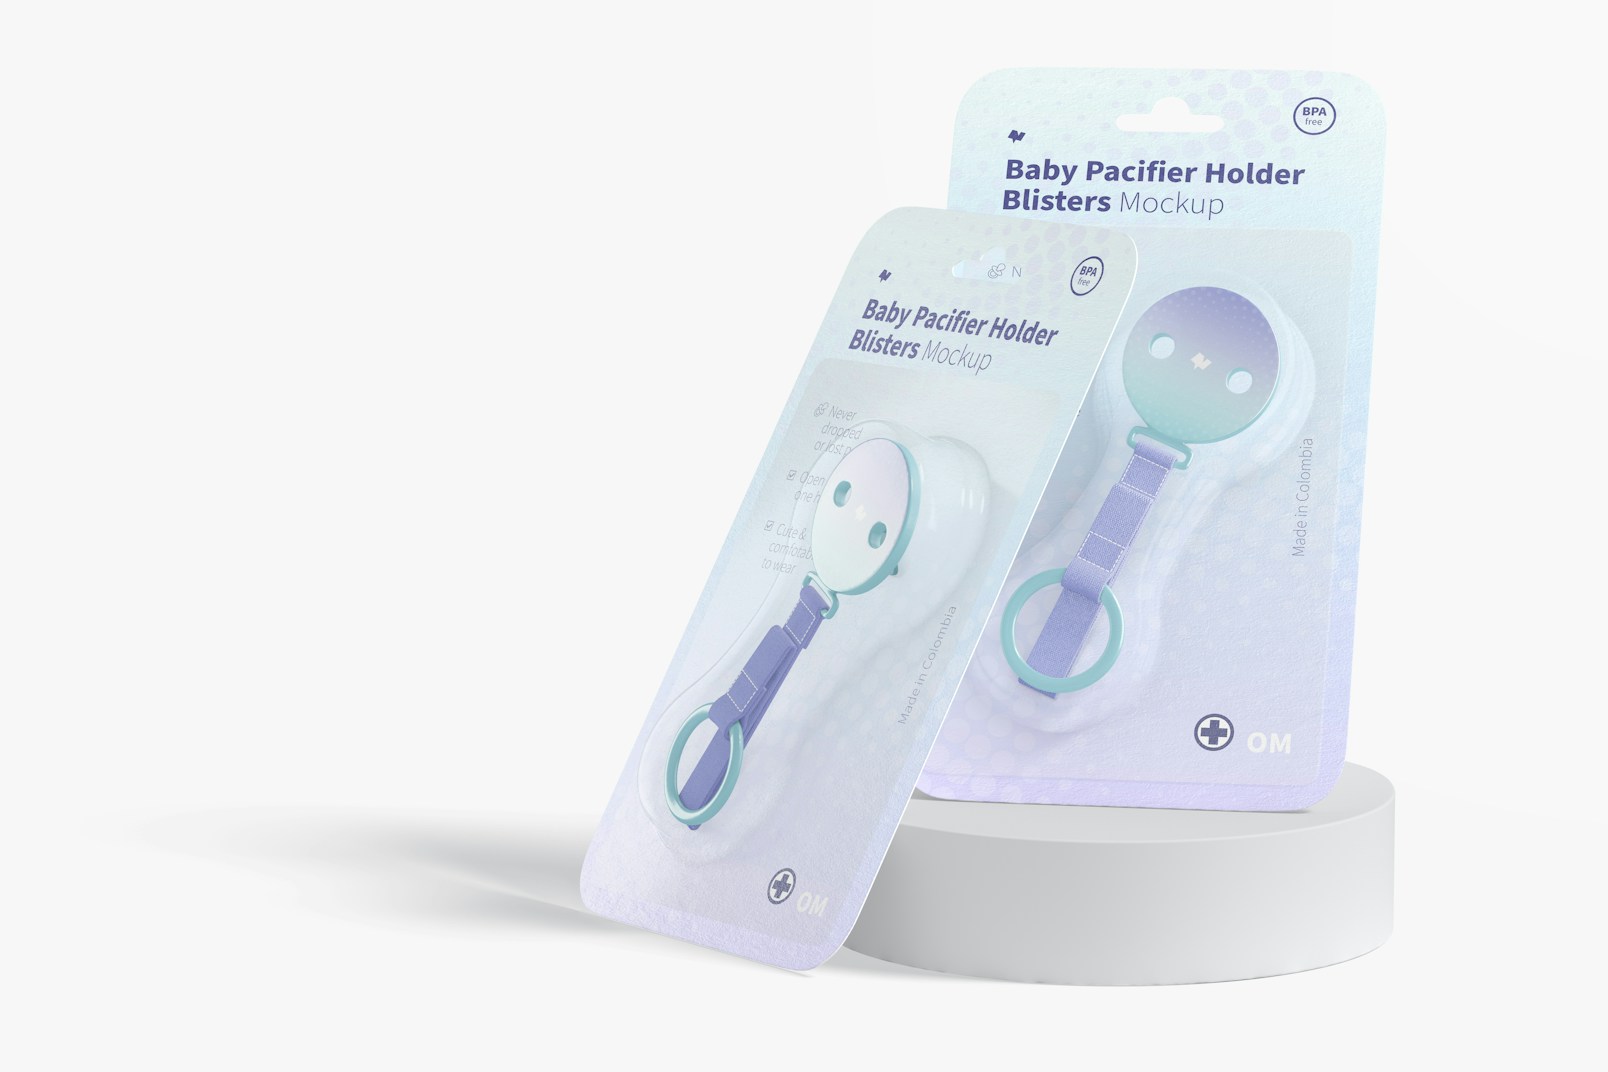 Baby Pacifier Holder Blisters Mockup, Perspective